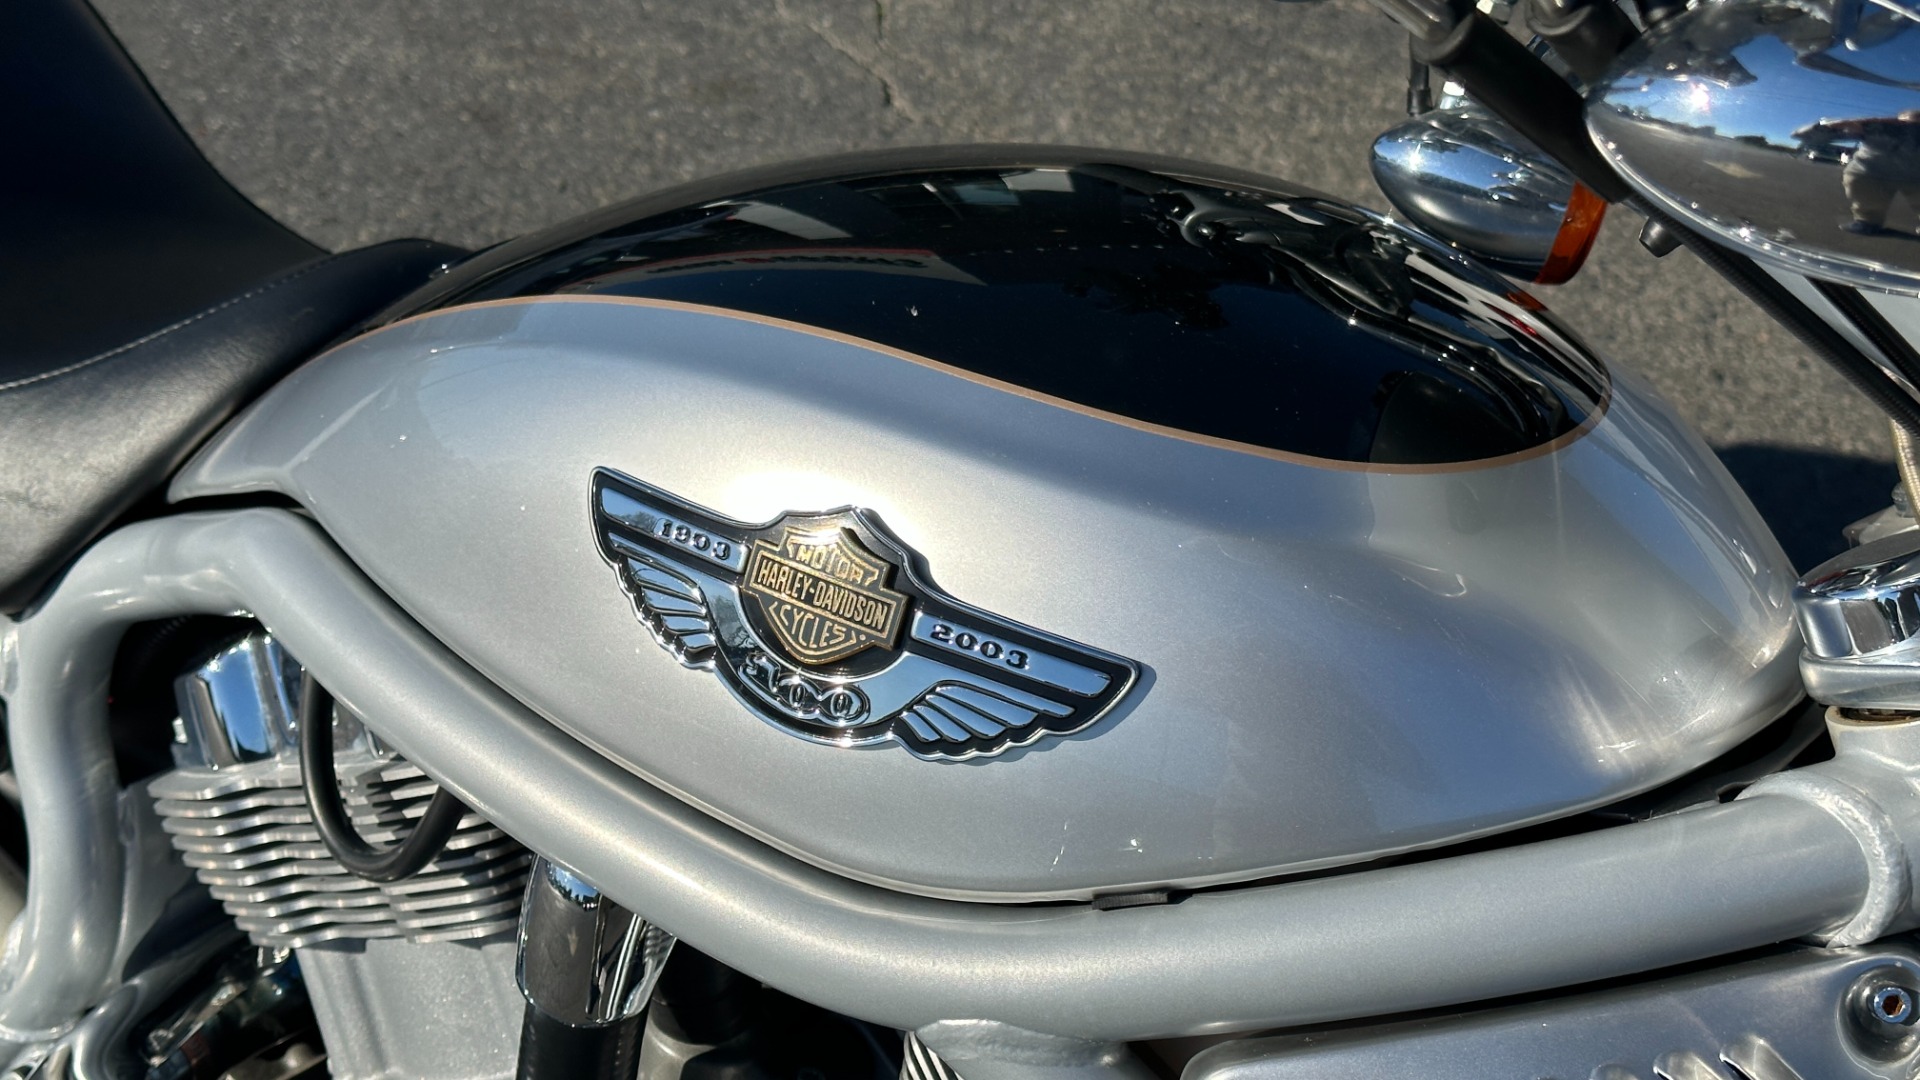 Used 2003 Harley Davidson V Rod ANNIVERSARY EDITION / 1130CC ENGINE / BREMBO BRAKES / VORTEX AIR SCOOPS for sale $7,995 at Formula Imports in Charlotte NC 28227 20